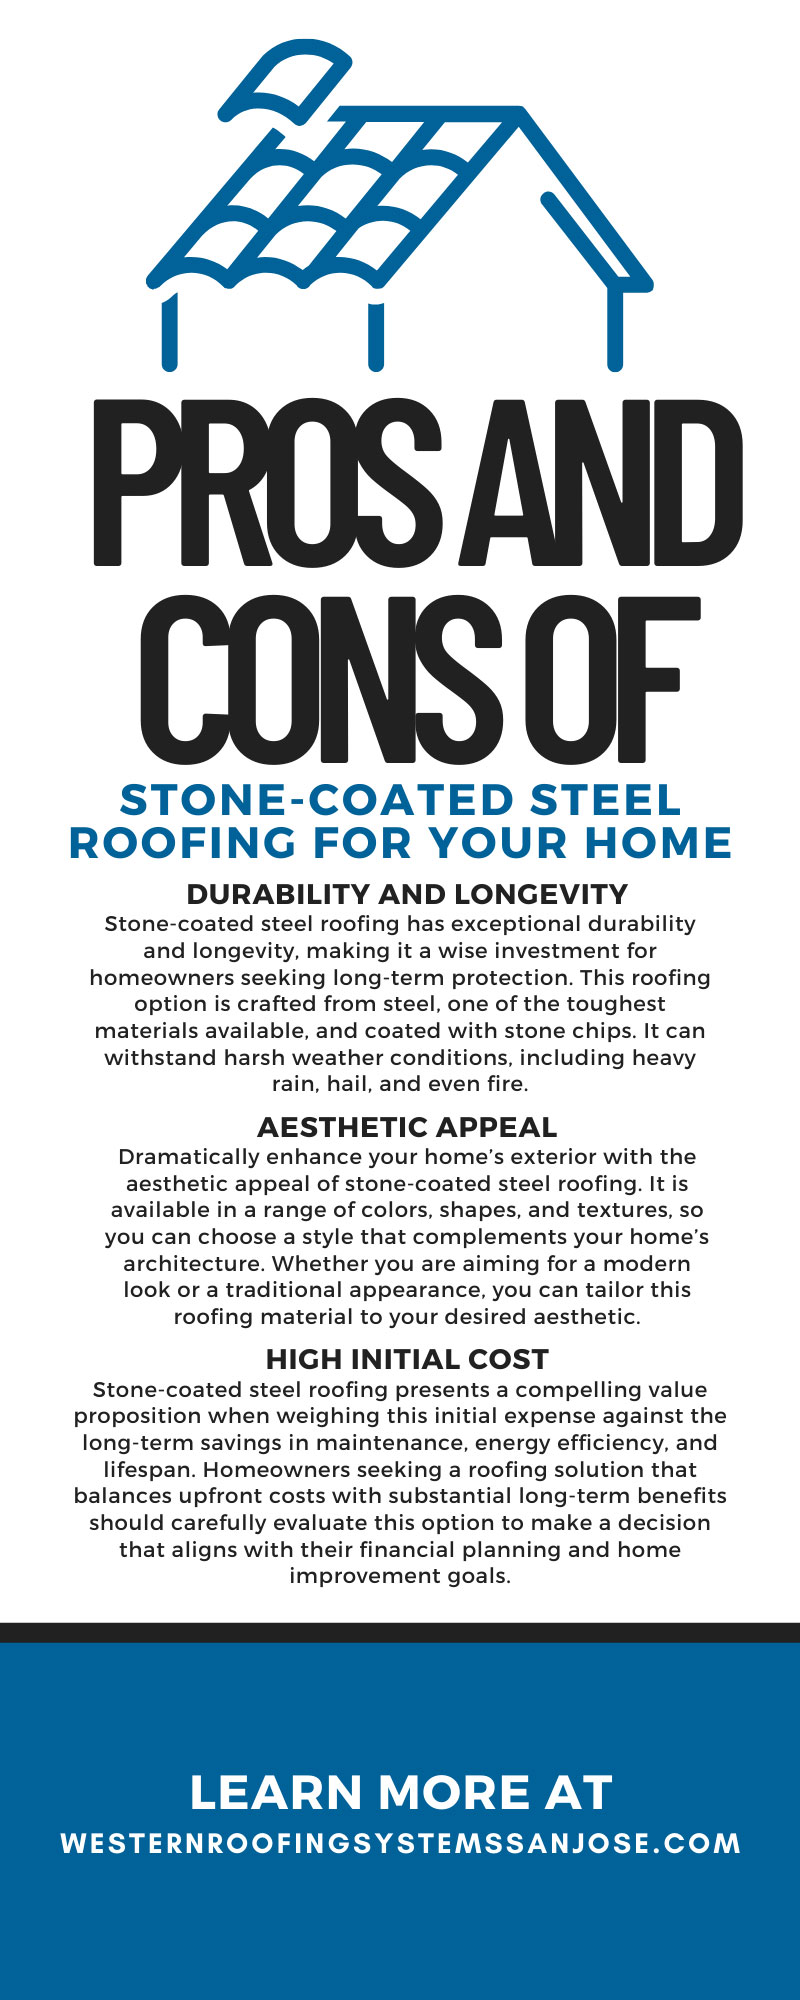 Pros and Cons of Stone-Coated Steel Roofing for Your Home